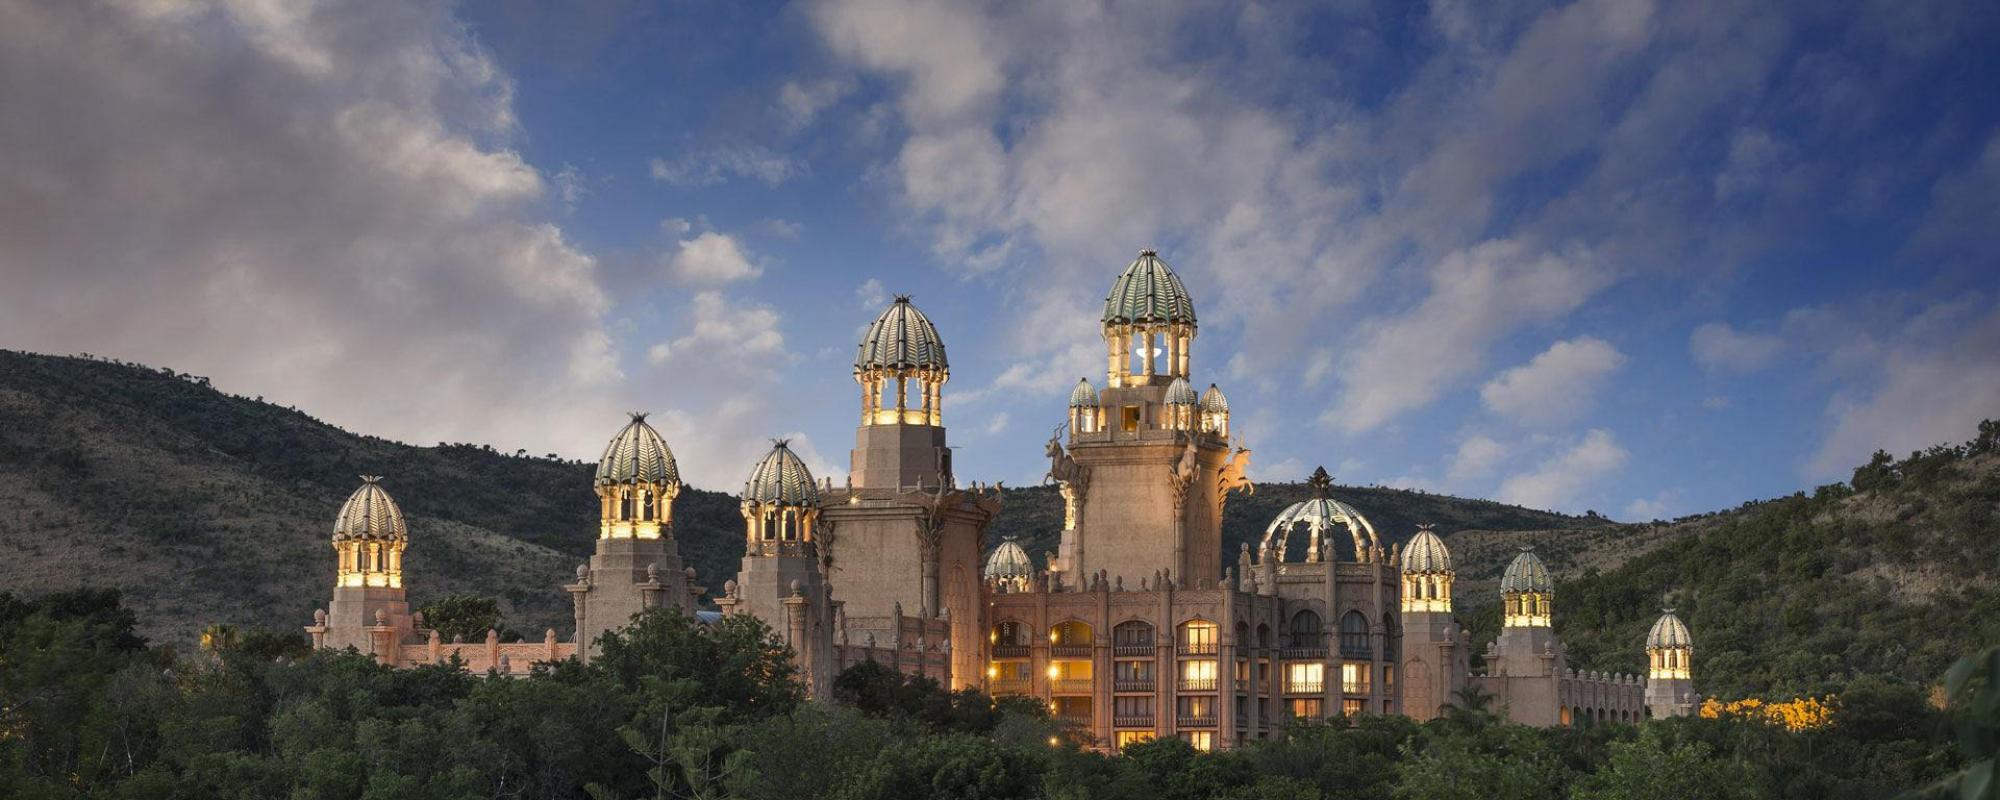 The The Palace of the Lost City's picturesque hotel in spectacular South Africa.